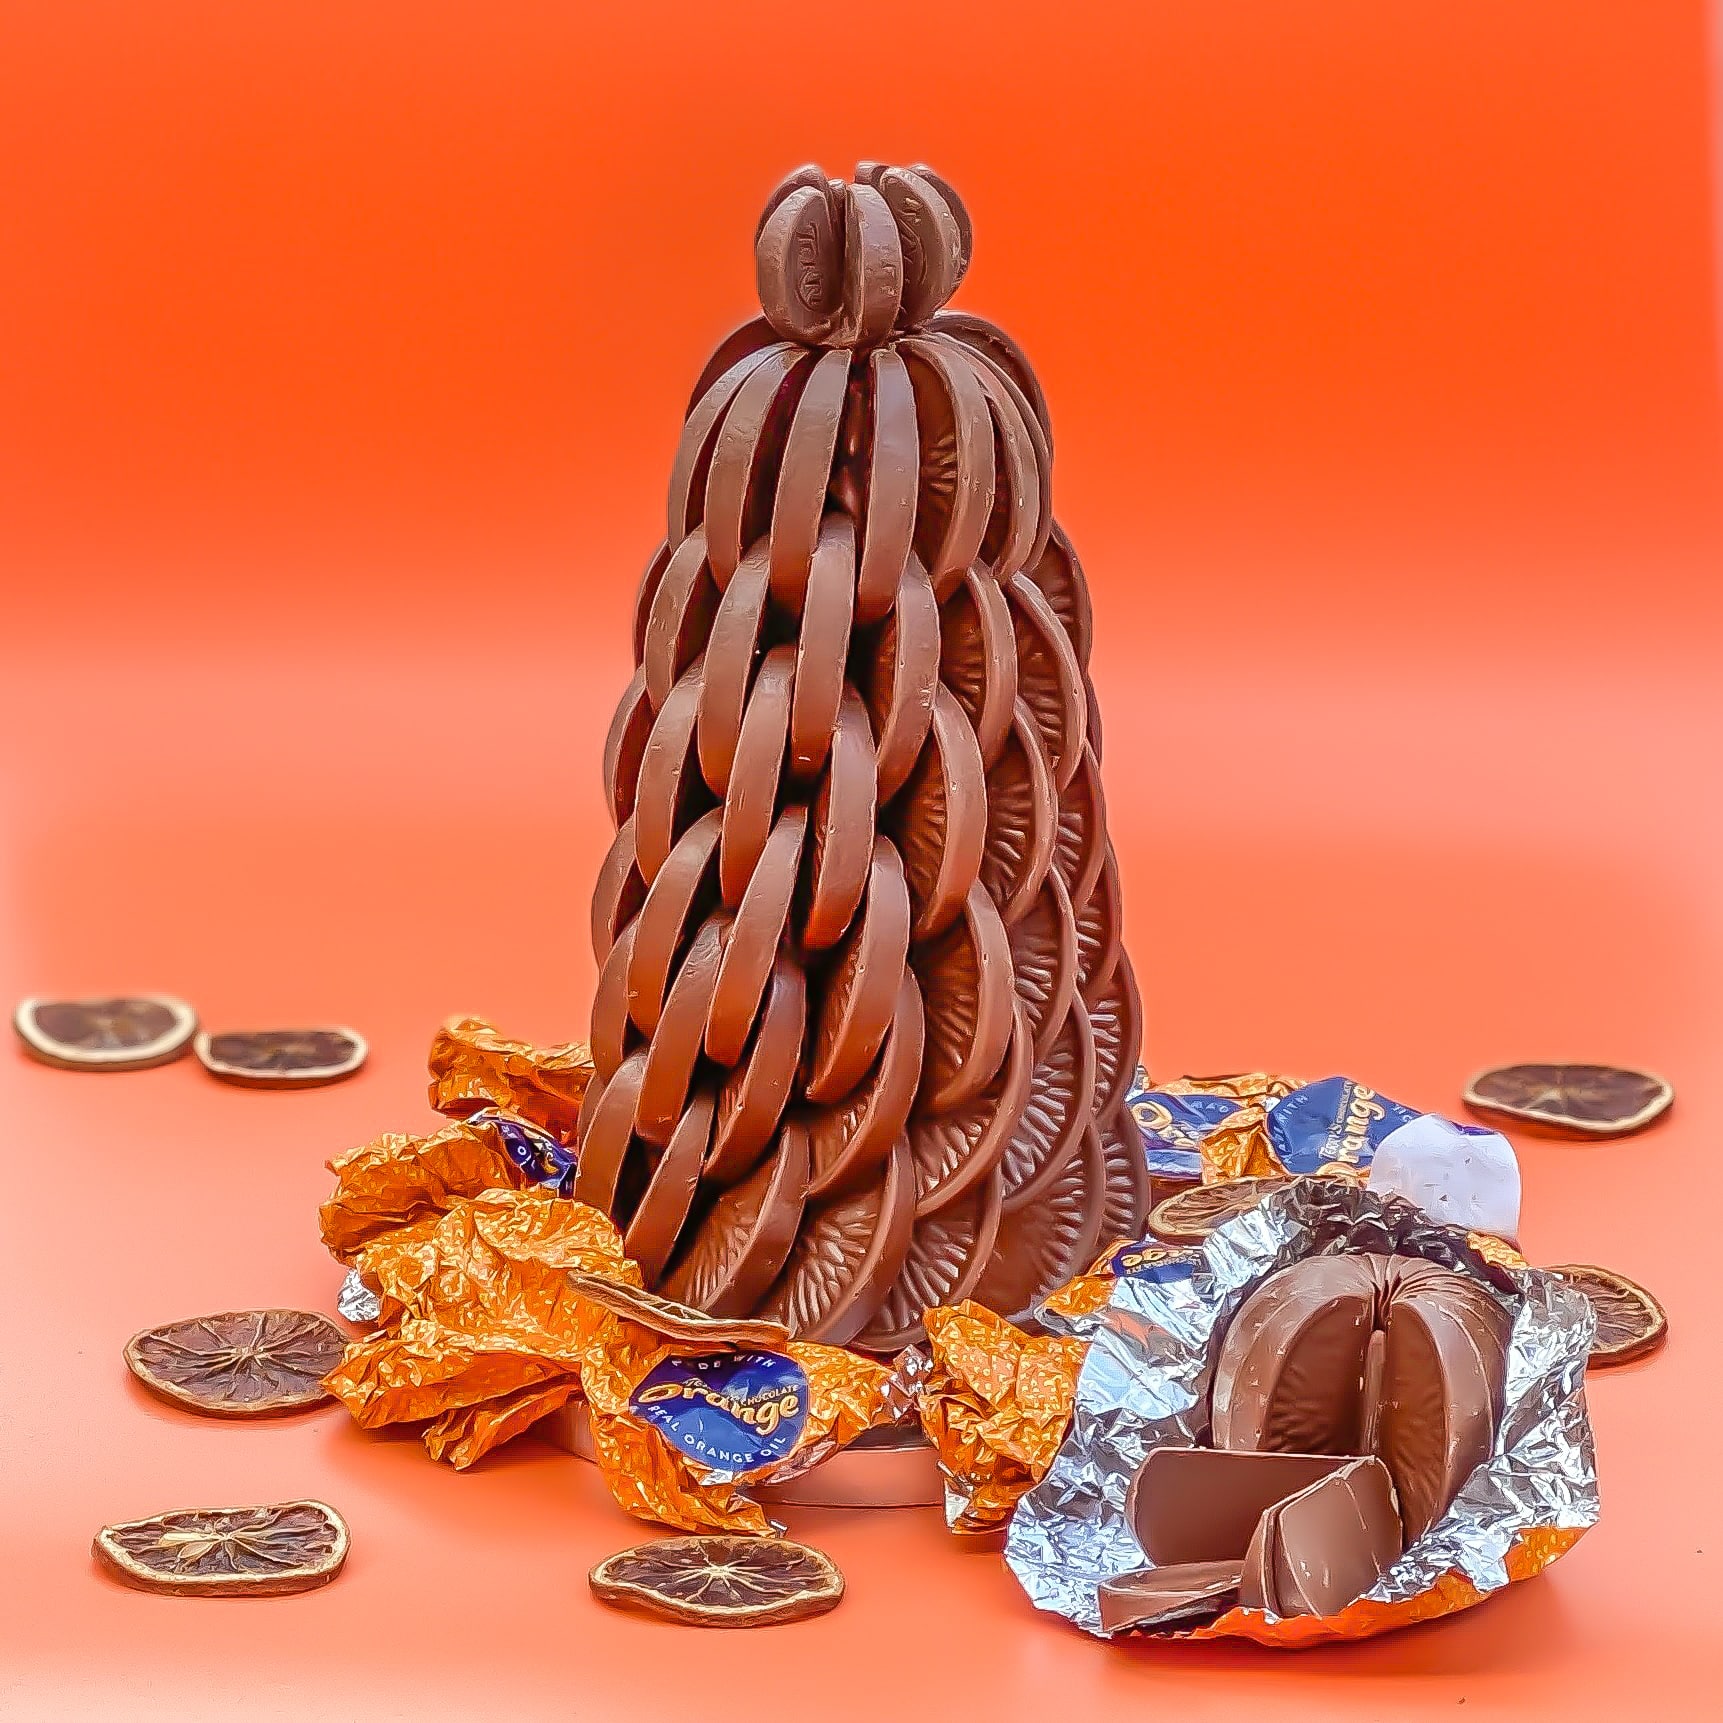 The History of Terry's Chocolate Orange - The London Cake Academy